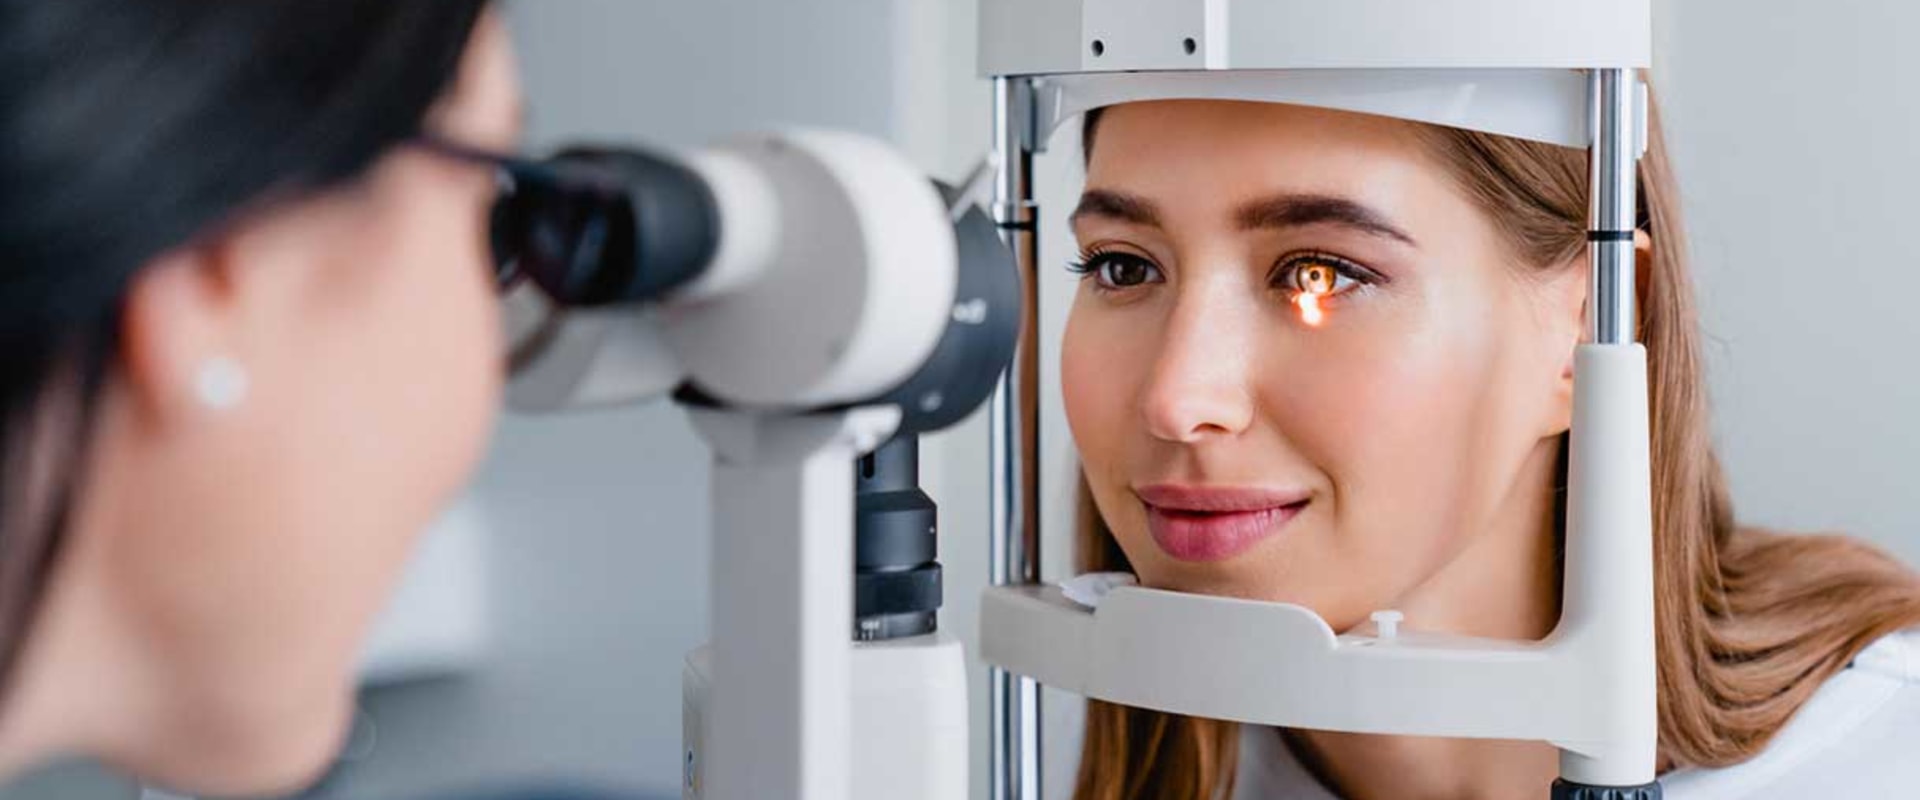 What is an Eye Exam and How Often Should You Have One?